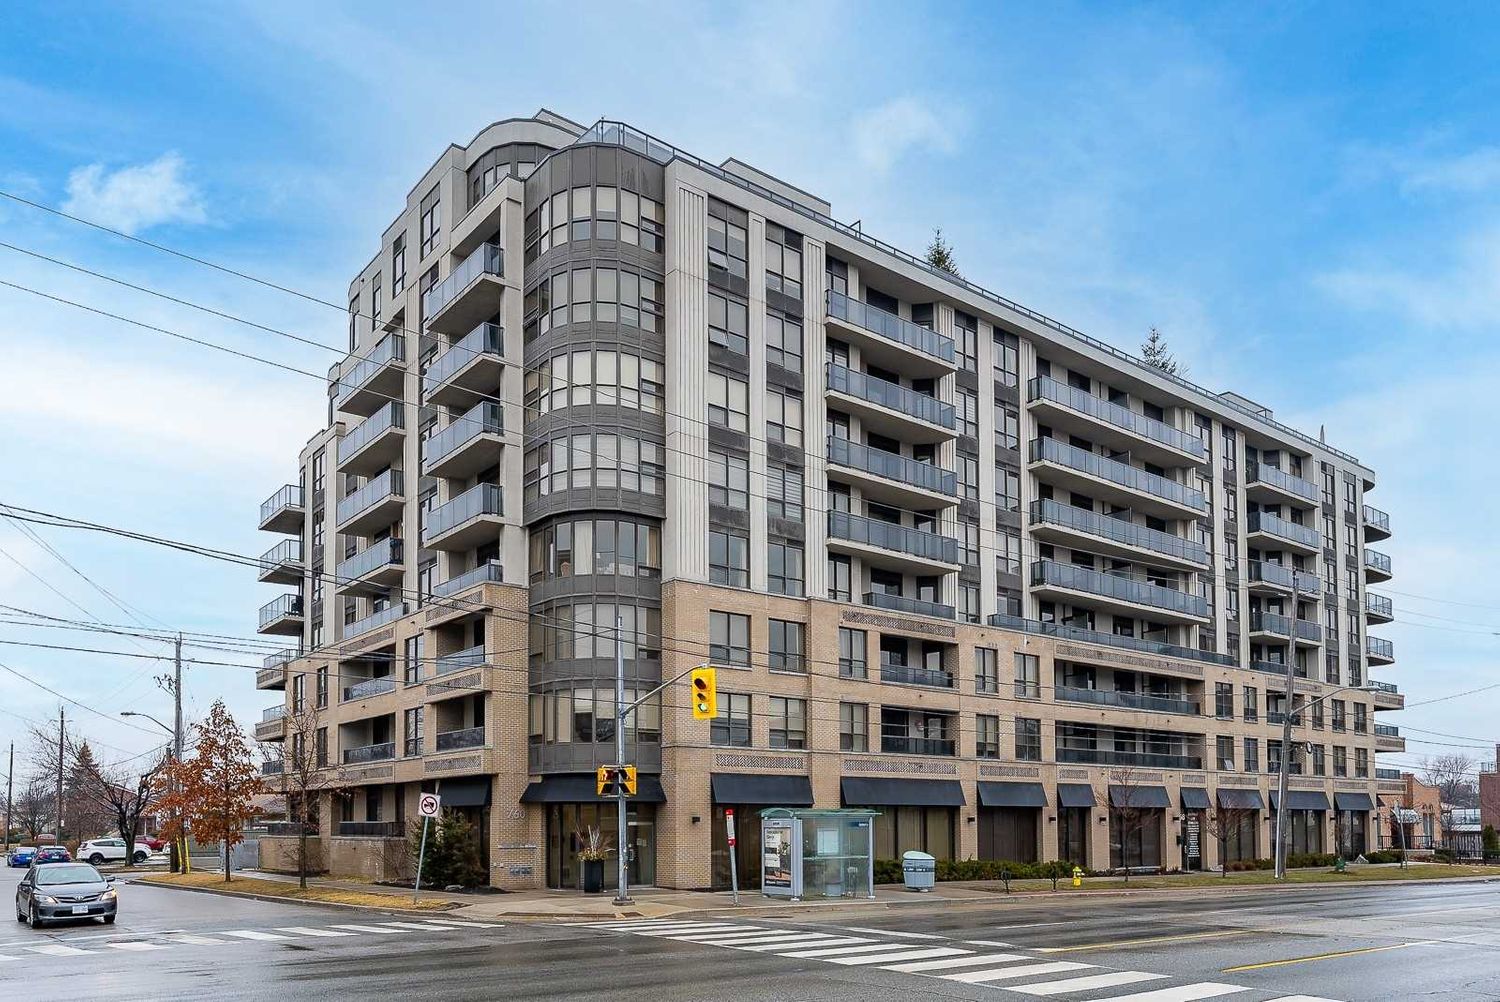 760 Sheppard Avenue W. The Avanti Condos is located in  North York, Toronto - image #1 of 3